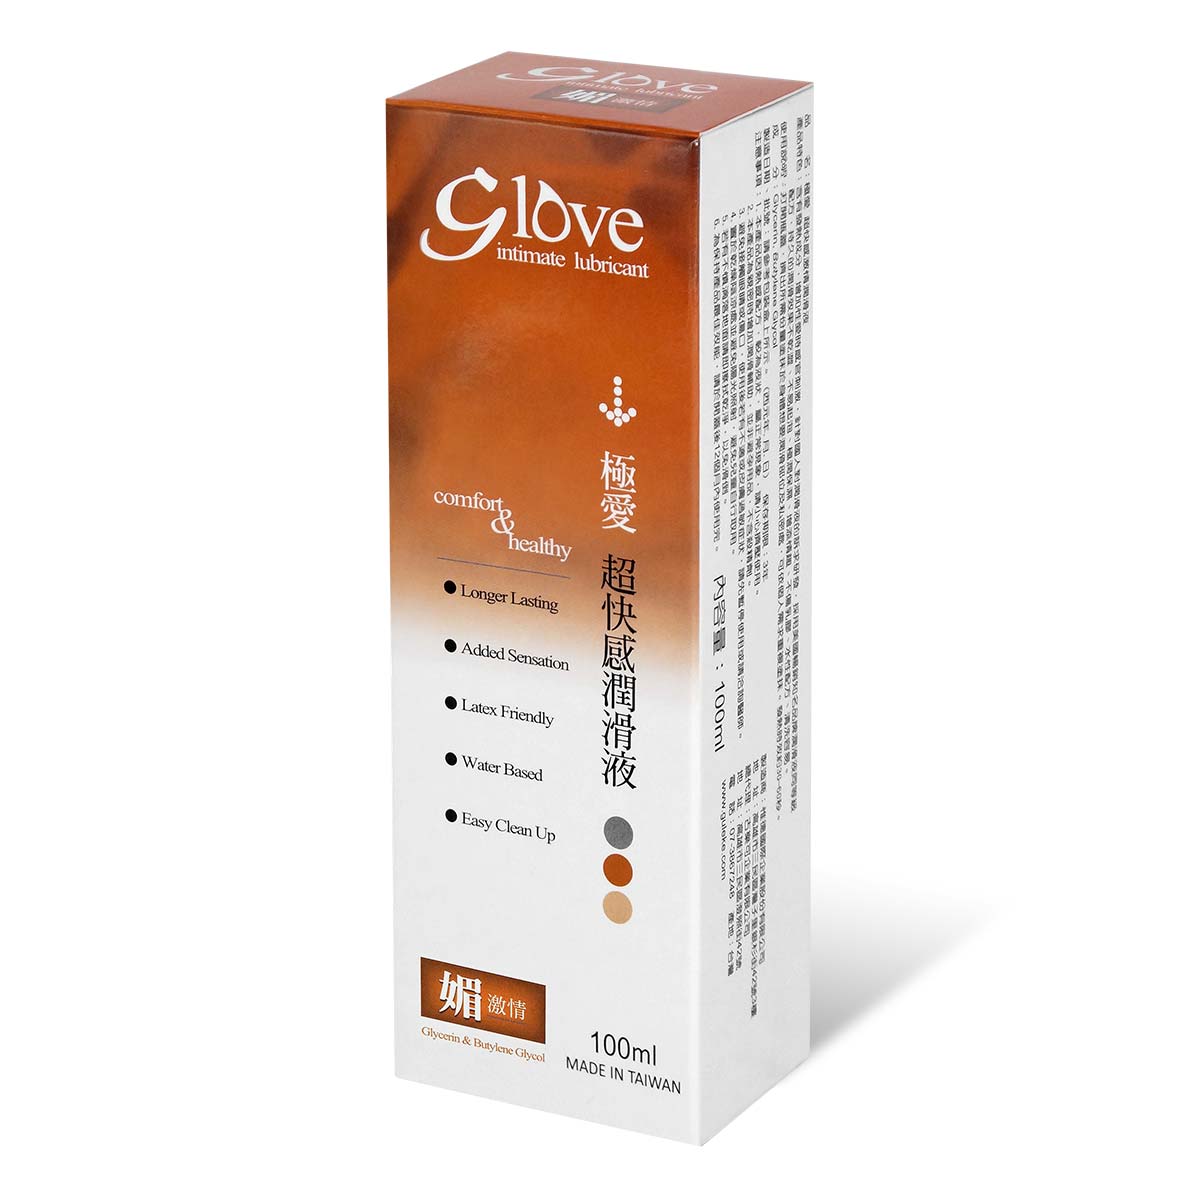 G Love intimate lubricant [Glycerin & Butylene Glycol] 100ml Water-based Lubricant-p_1